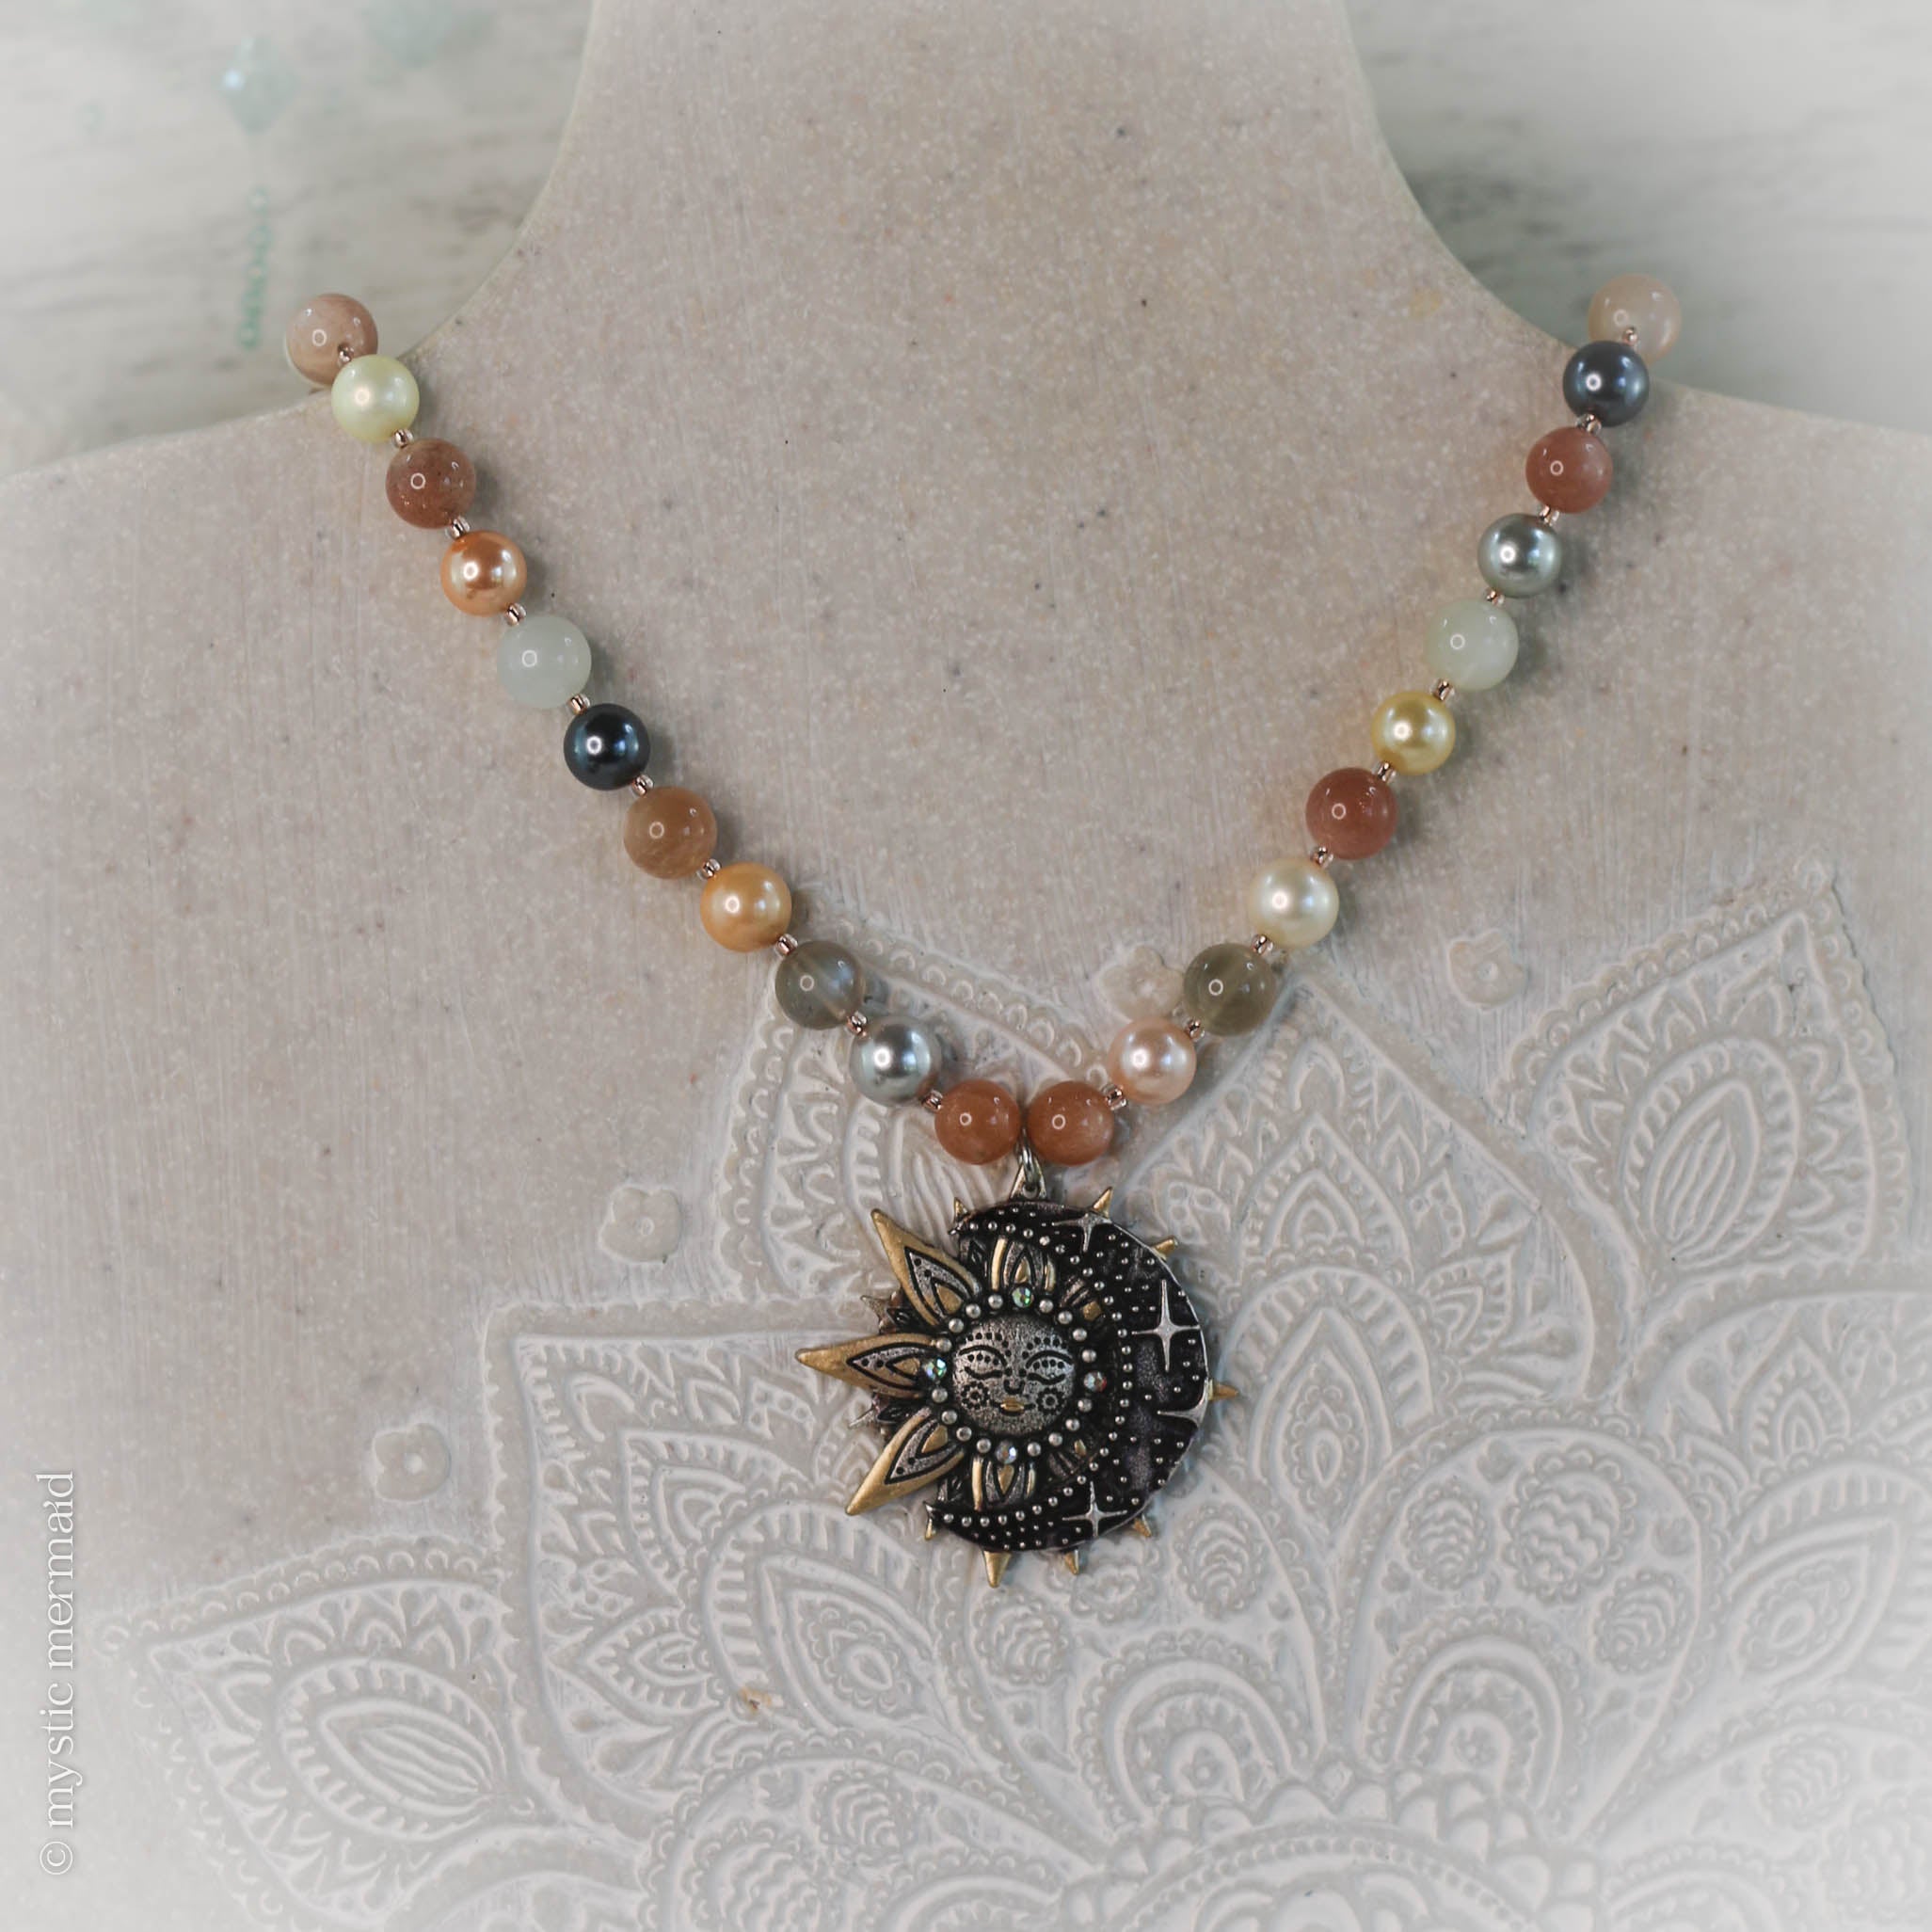 The Sun, The Moon, Shining and Sparkling Moonstone and South Sea Pearl Necklace